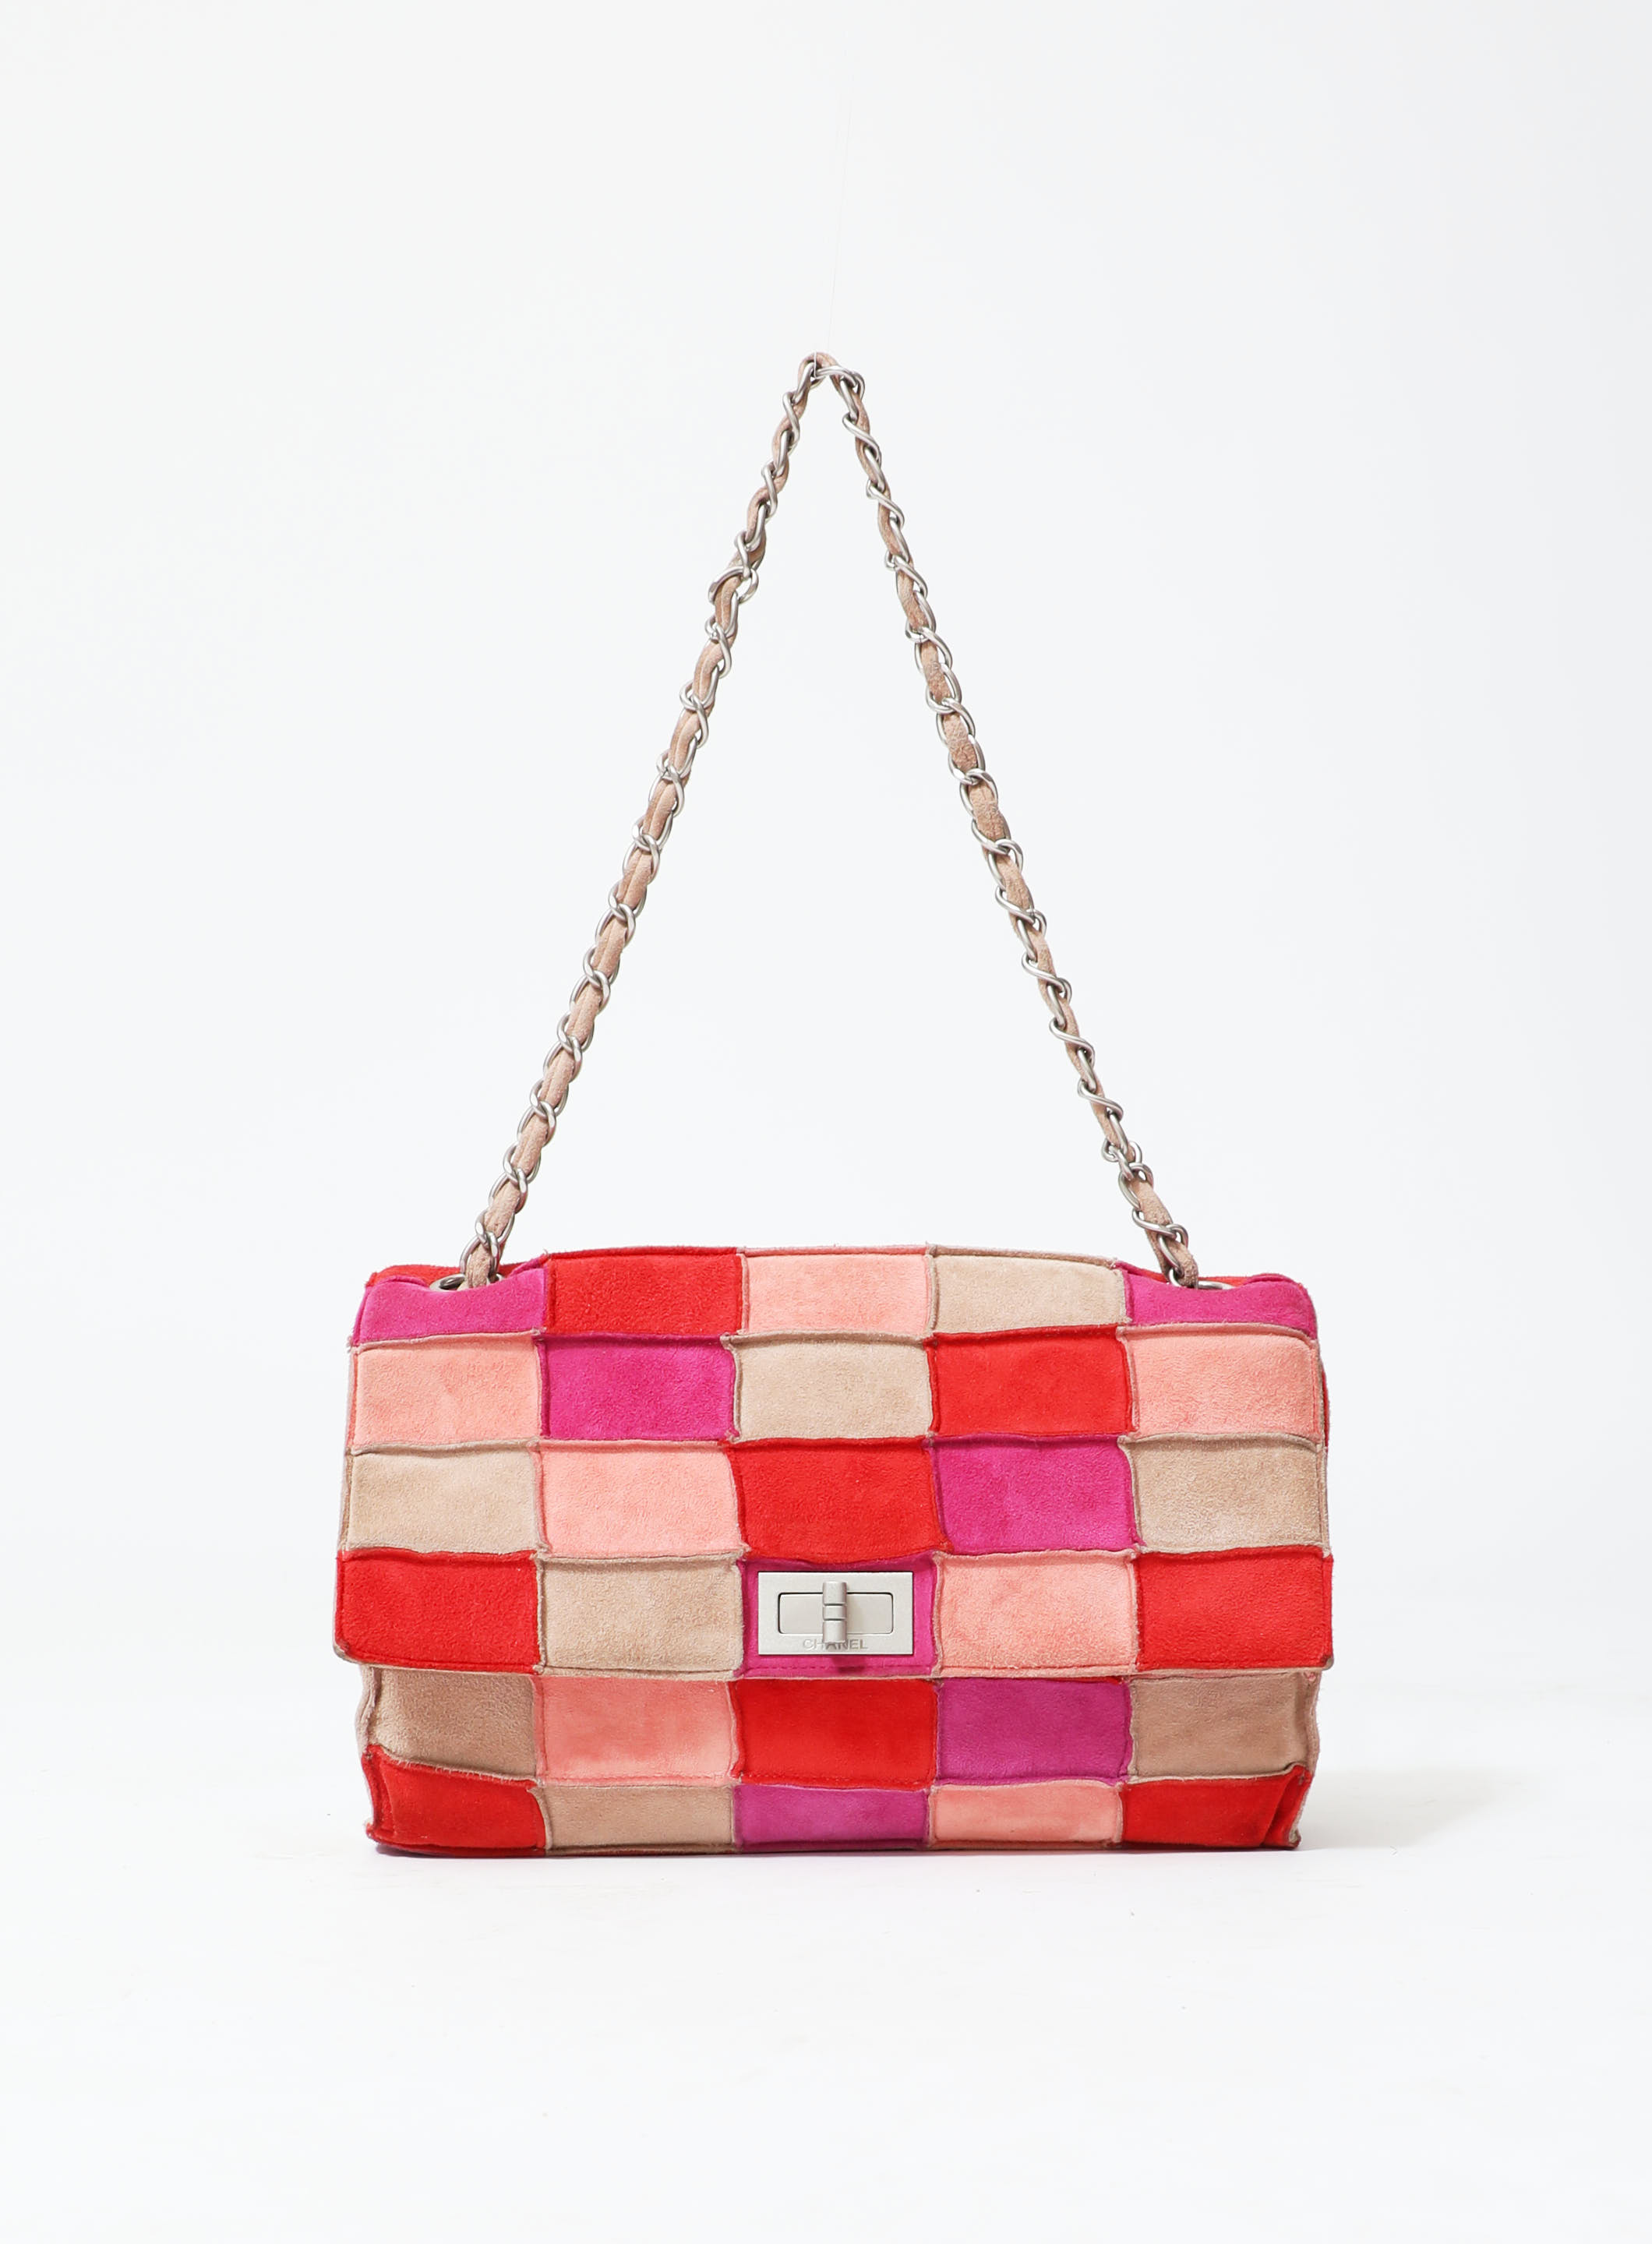 Chanel Quilted Patchwork Jumbo Flap Bag